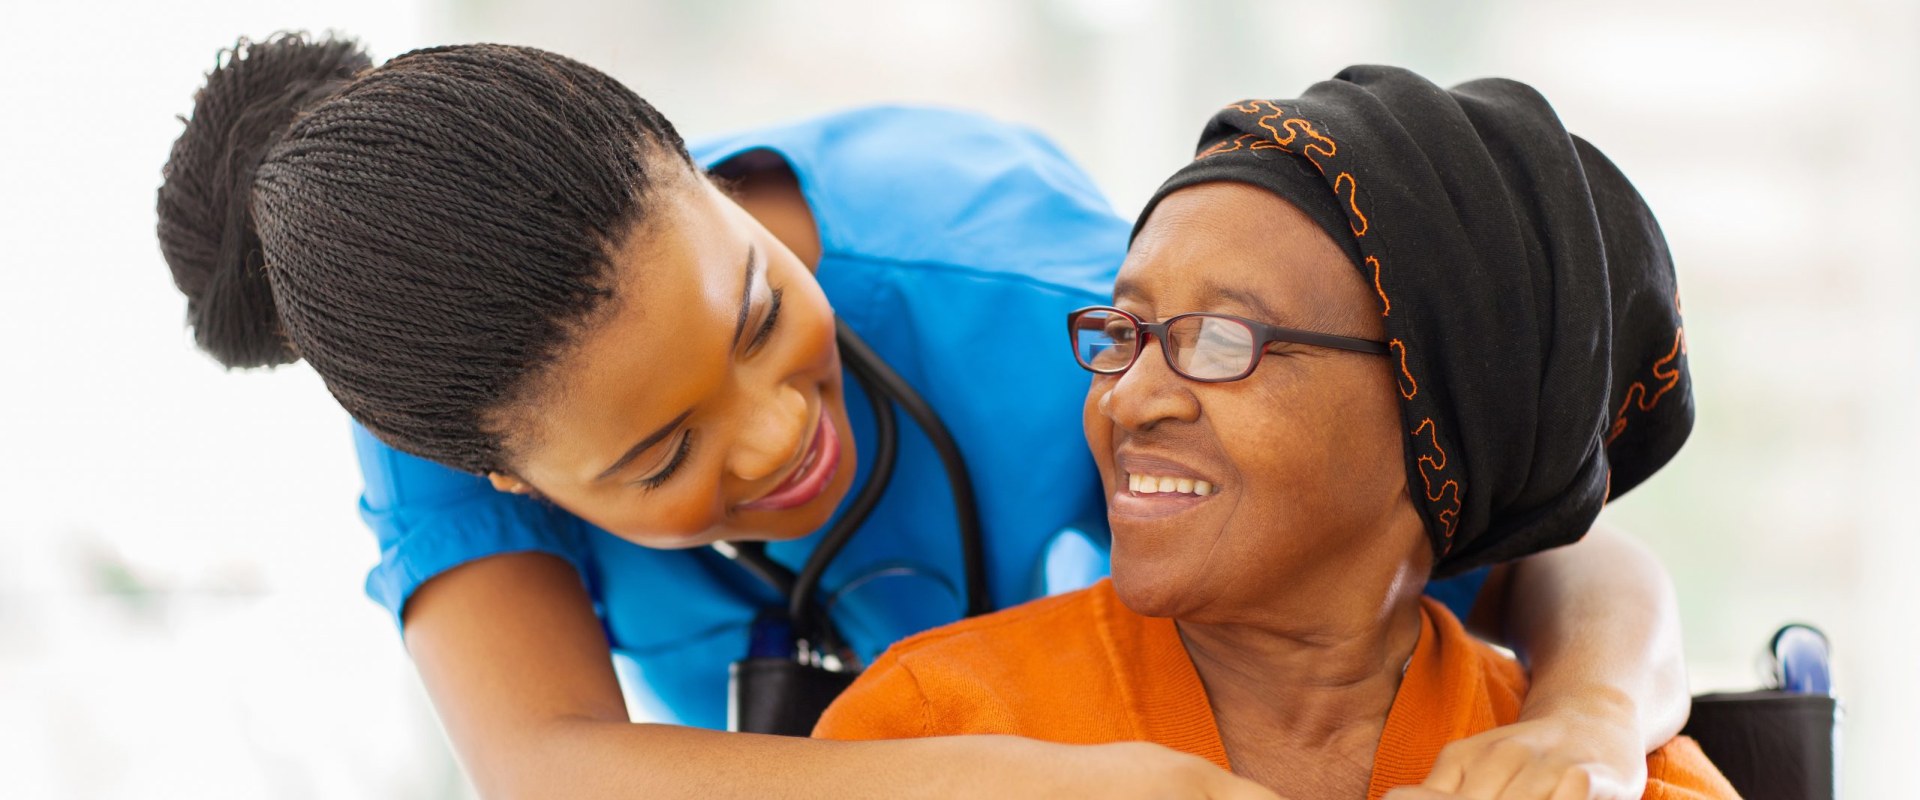 What are the important traits of a caregiver?